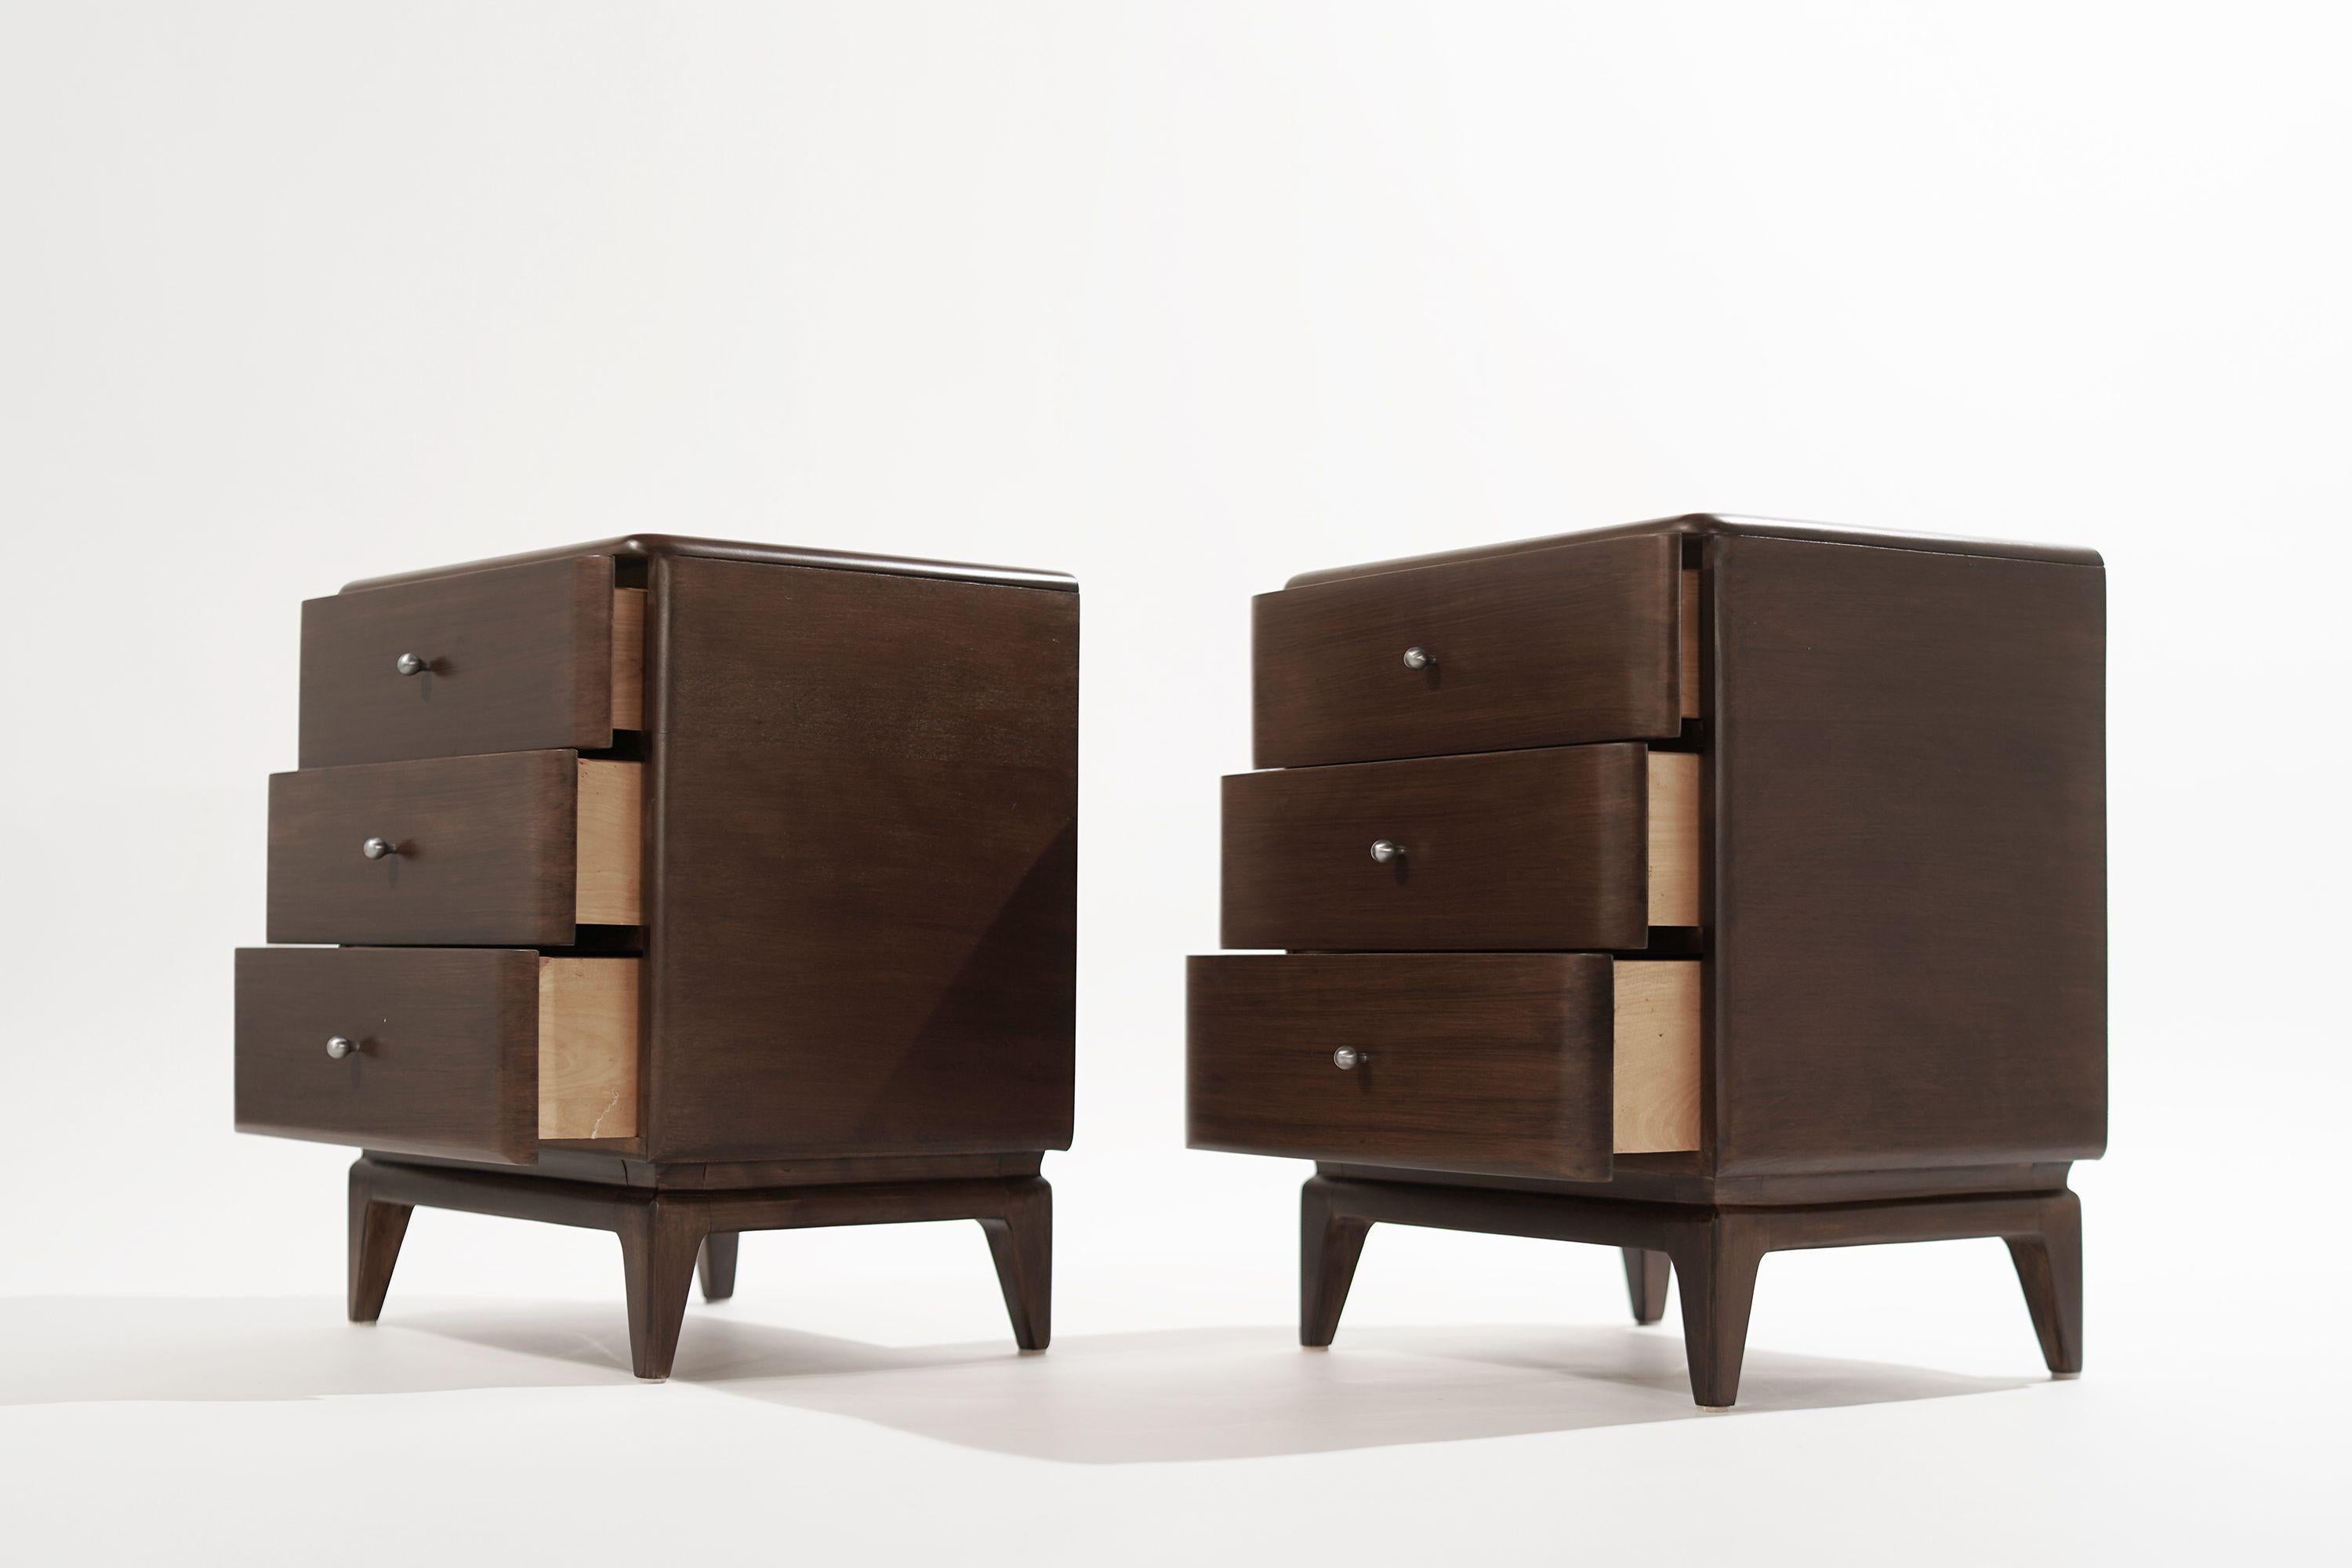 American Set of Bedside Tables by Heywood Wakefield, 1950s